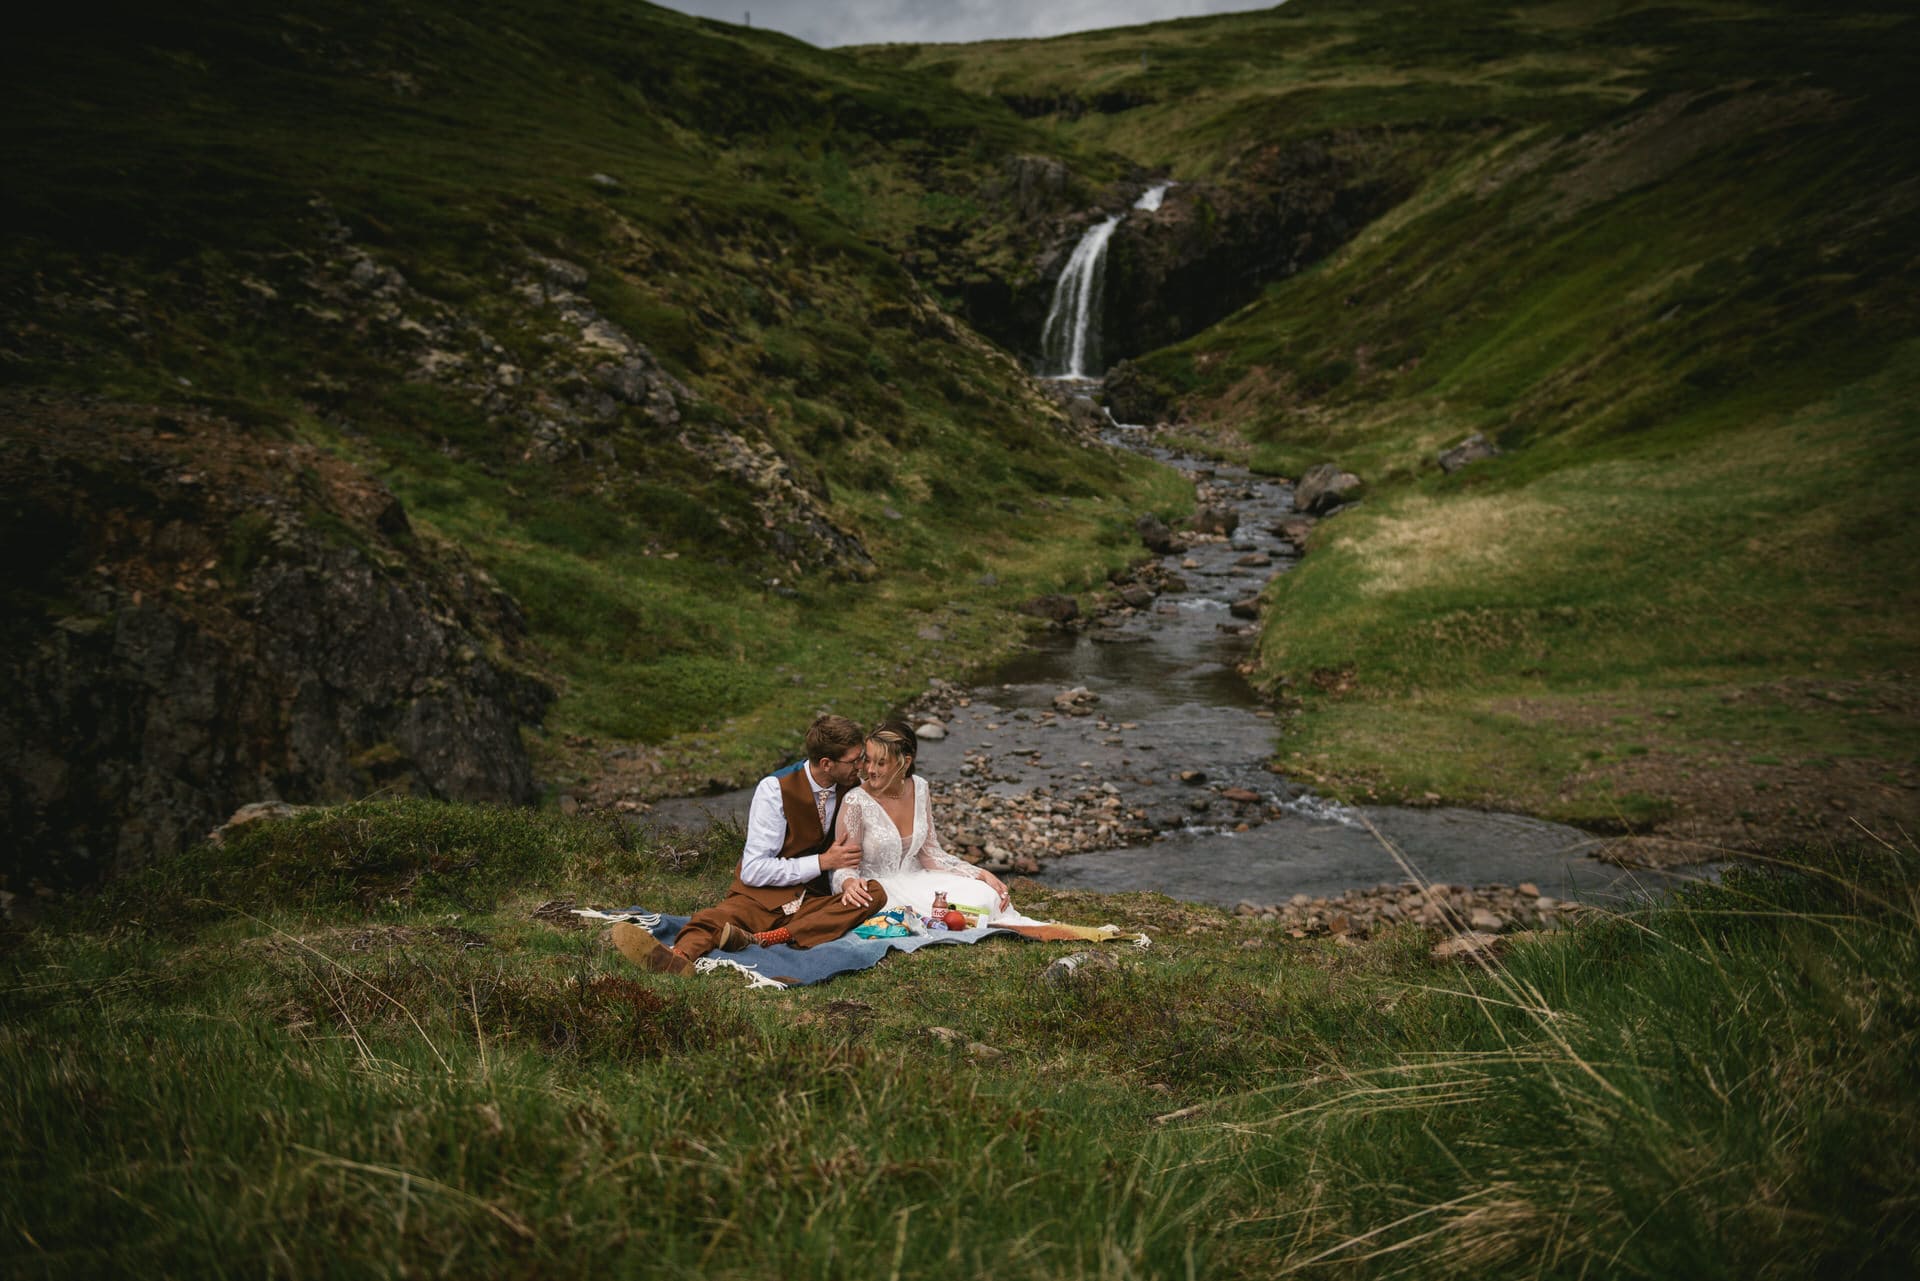 Captivating shot of the couple's love story set against the mystique of the Westfjords.